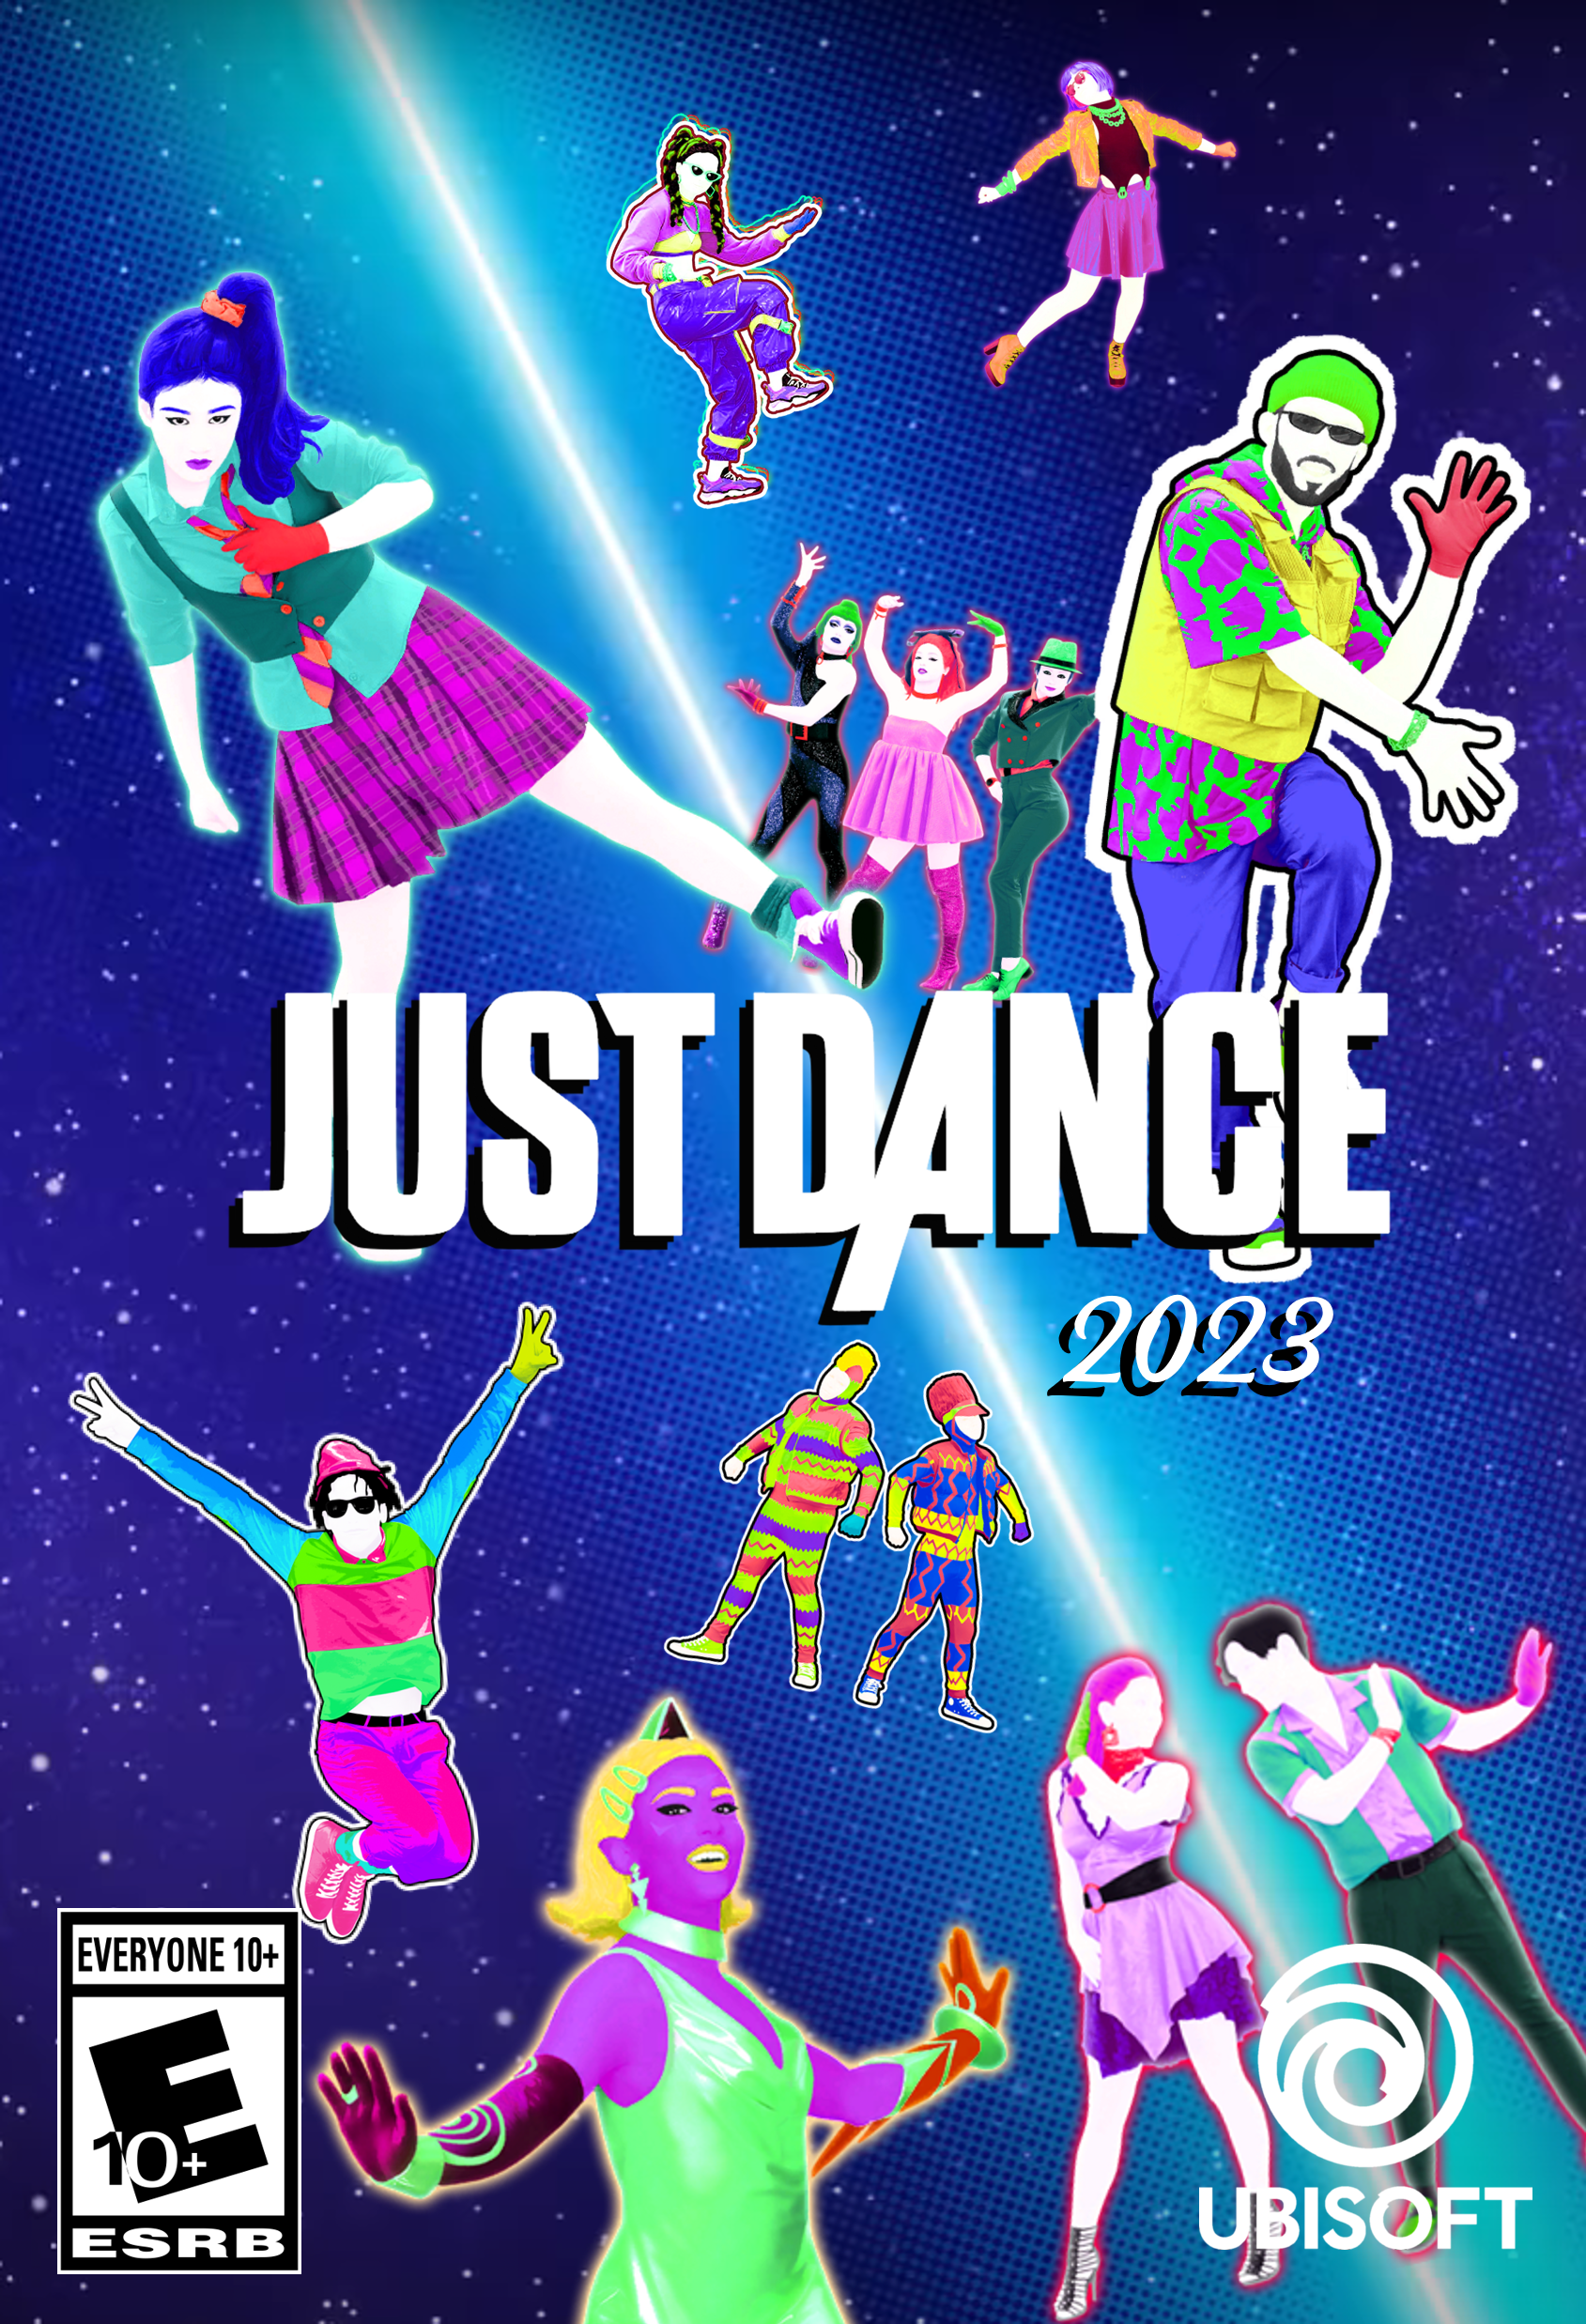 https://static.wikia.nocookie.net/justdance/images/b/b1/Just_Dance_2023_cover_fanmade.png/revision/latest?cb=20220305110940